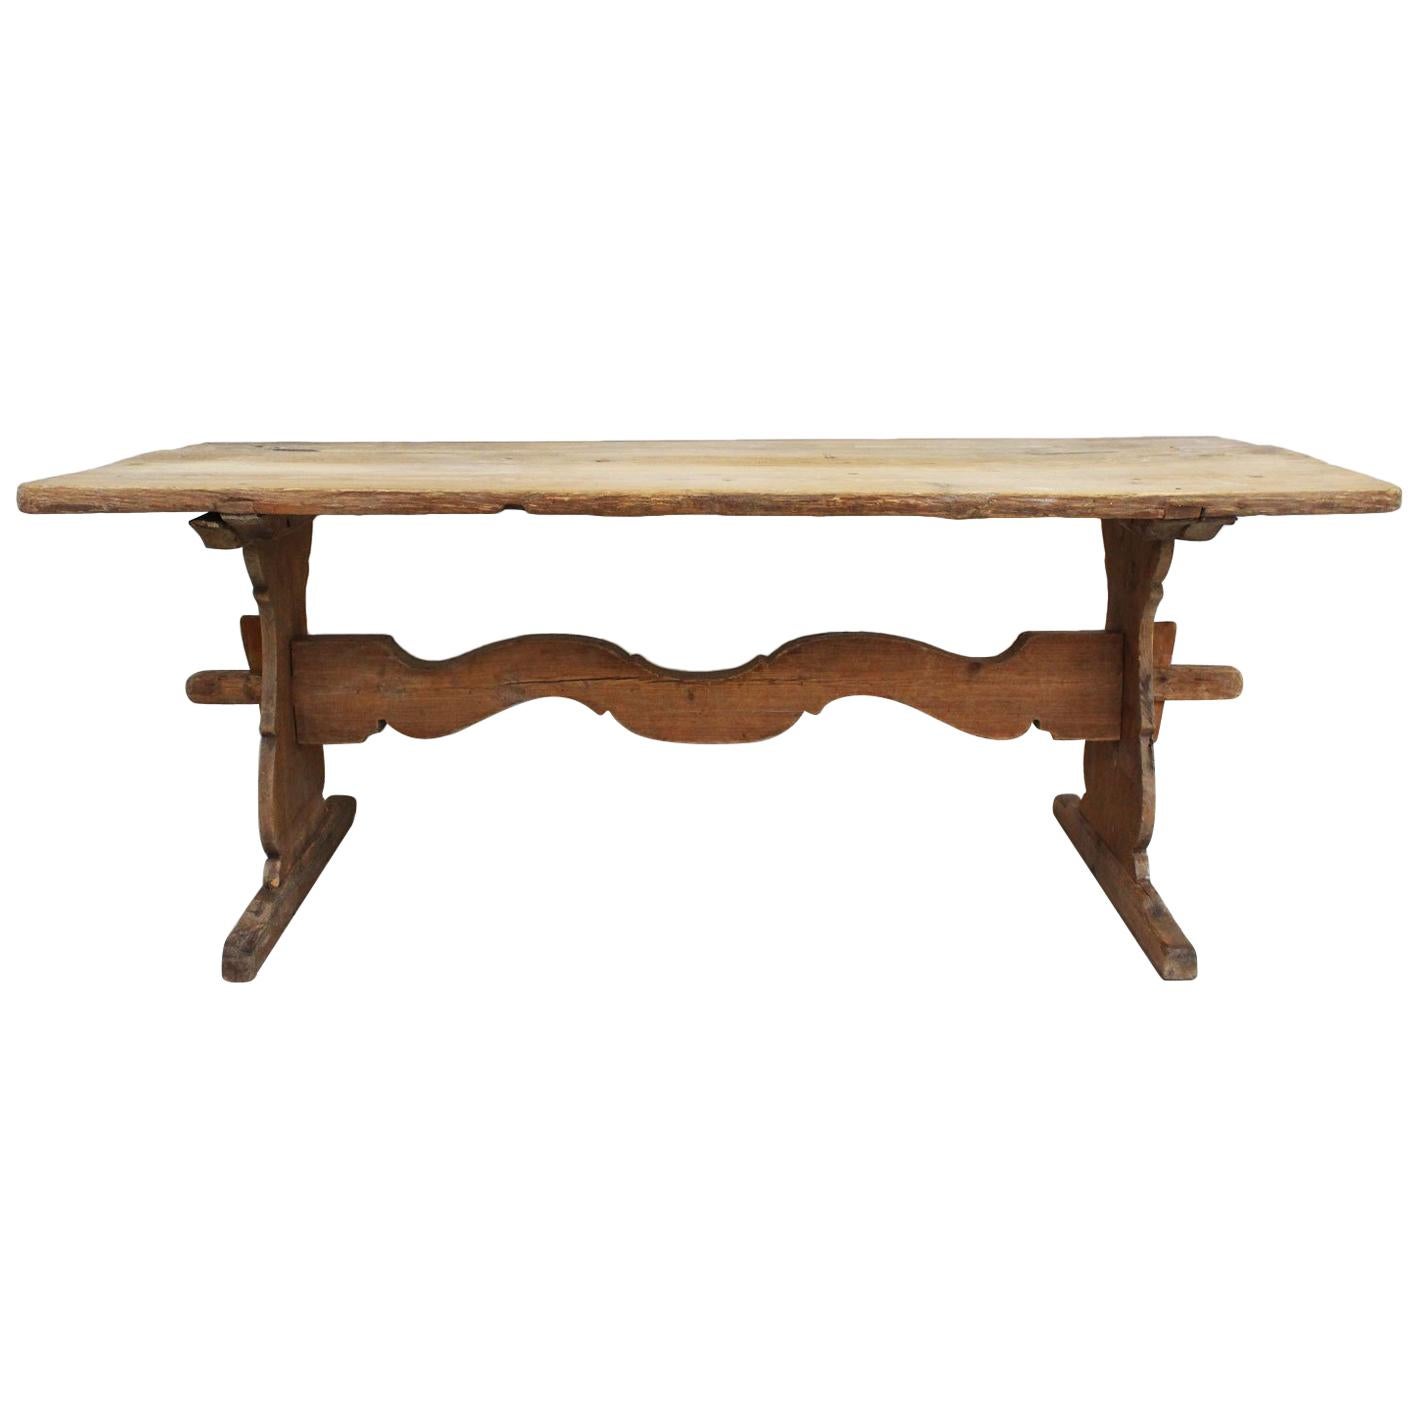 Late 18th Century Swedish Pine Trestle Dining Table with Shaped Rail